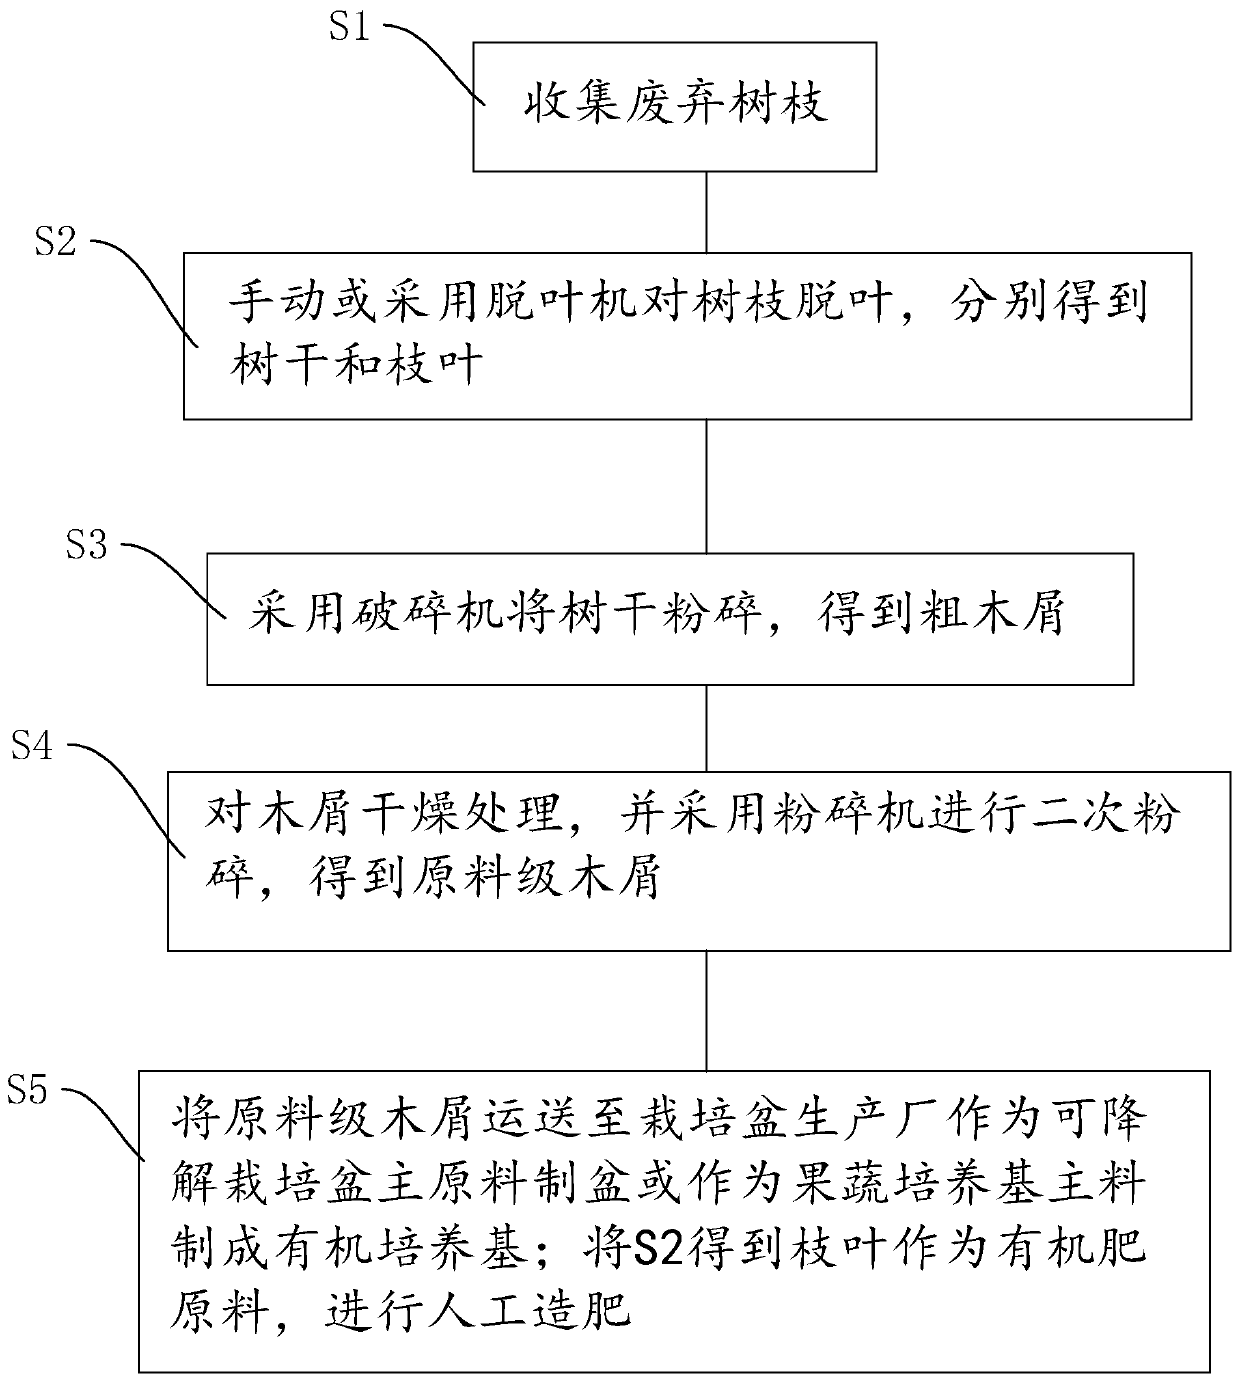 Utilization method of garden waste branches and leaf remover applied to utilization method